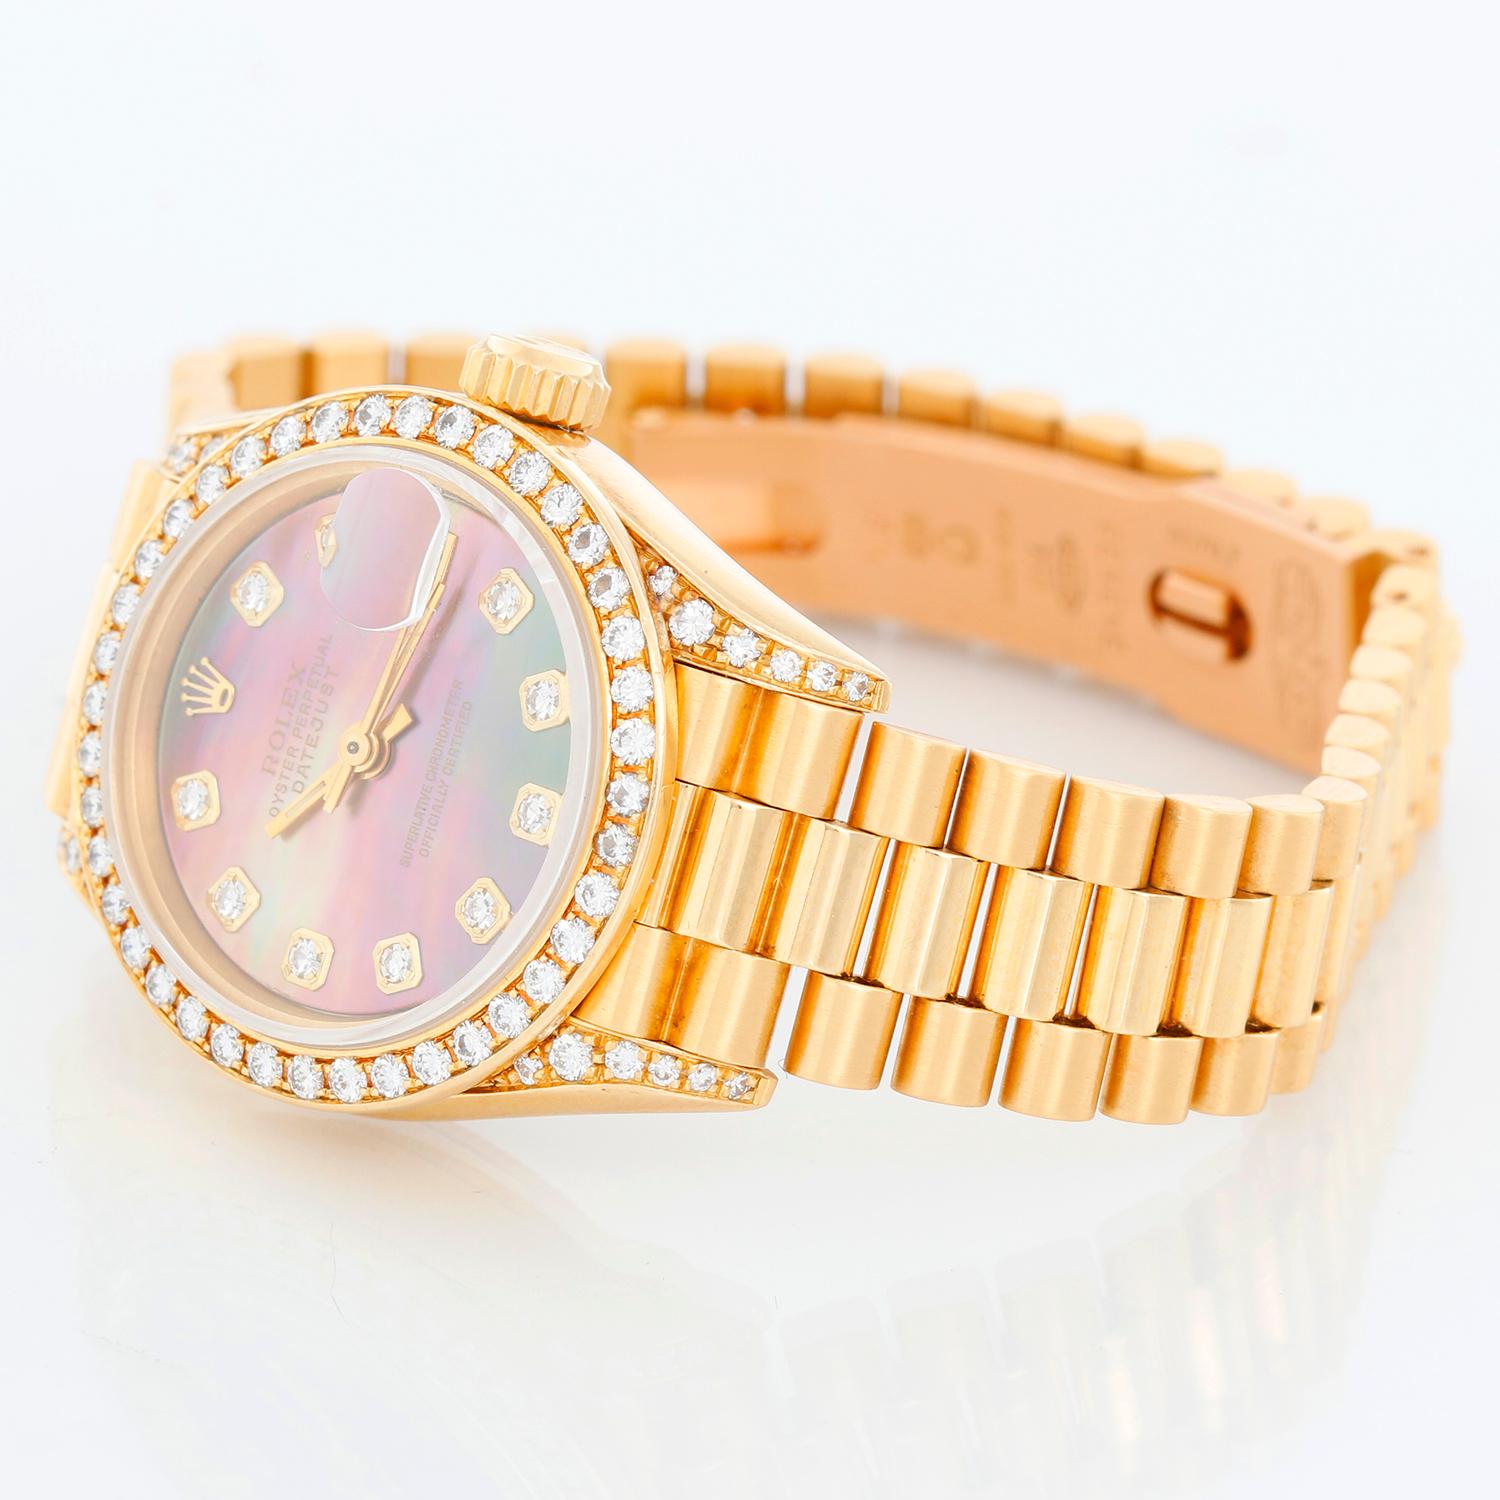 Ladies Rolex President 18k Gold & Diamond Watch 69158 - Automatic winding. 18k yellow gold case with factory diamond bezel and factory diamond lugs (26 mm). Genuine Rolex mother of pearl diamond dial with diamond hour markers. 18k yellow gold Rolex